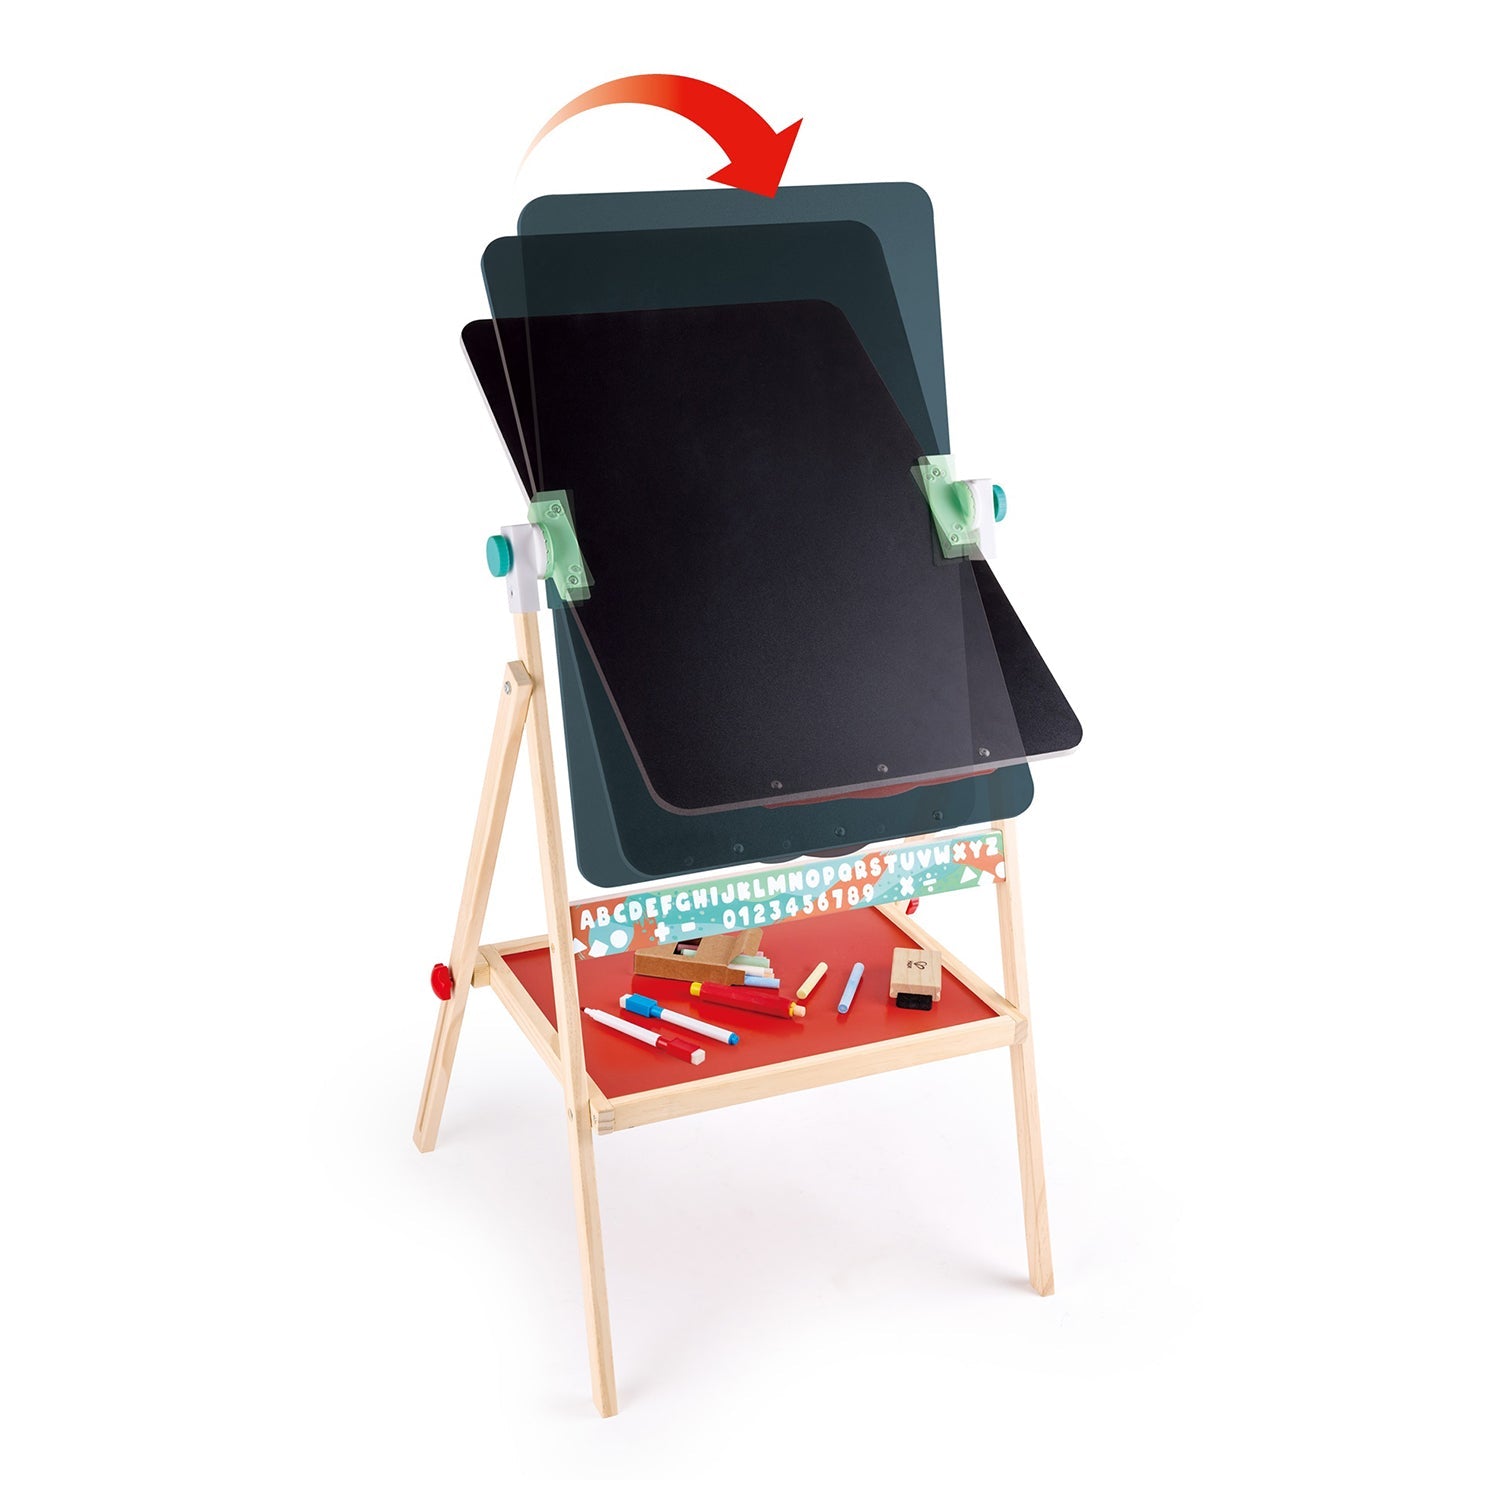 WOOD CITY Easel for Kids, Adjustable Standing Art Easel with Painting  Accessories Wooden Chalkboard & Magnetic Whiteboard & Painting Paper Stand